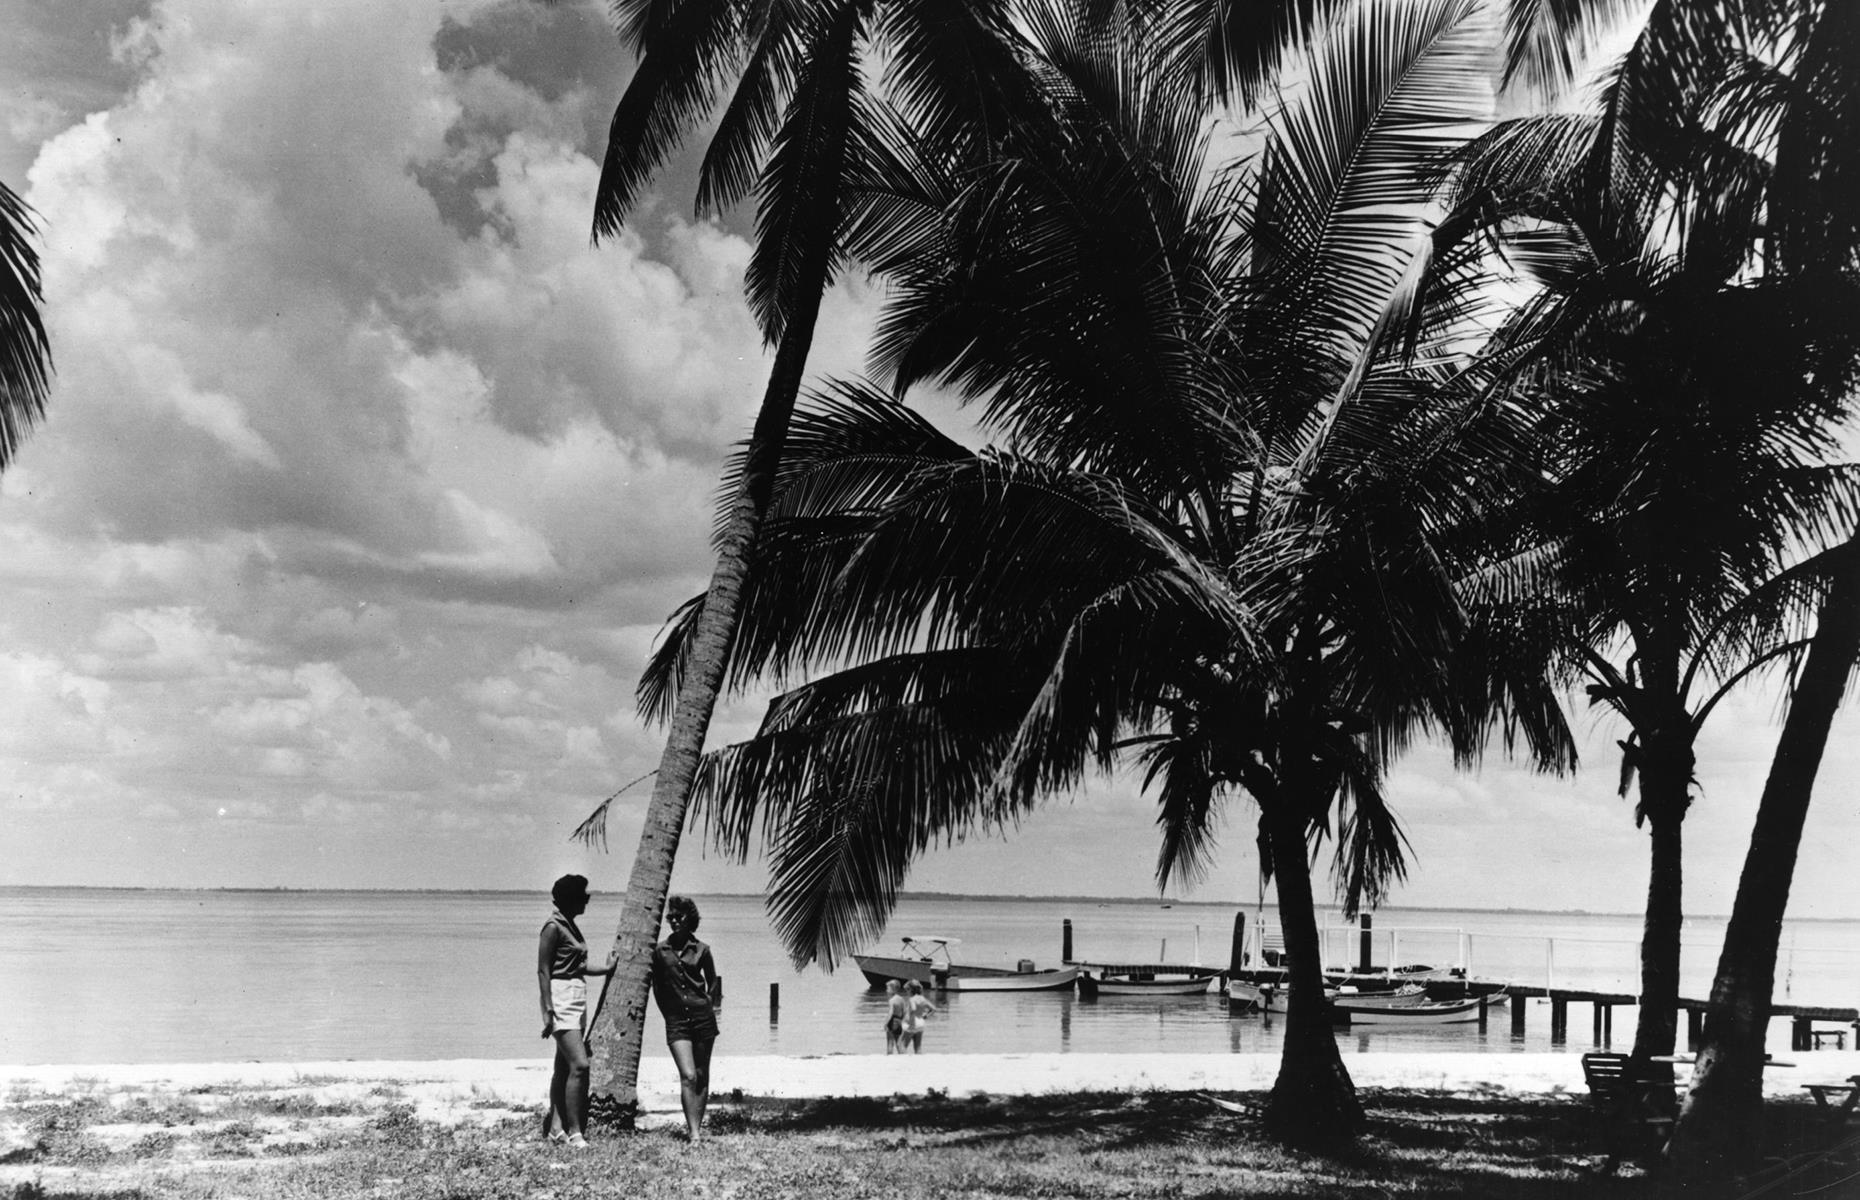 Beyond the buzz of Miami, Florida had plenty of quieter tourist spots too. Destinations such as Sanibel Island, a Floridian barrier island that juts into the Gulf of Mexico, offered a more sedate escape through the 1950s and beyond. A couple enjoy the shade of a palm tree in this 1955 photo taken on a Sanibel Island strand.